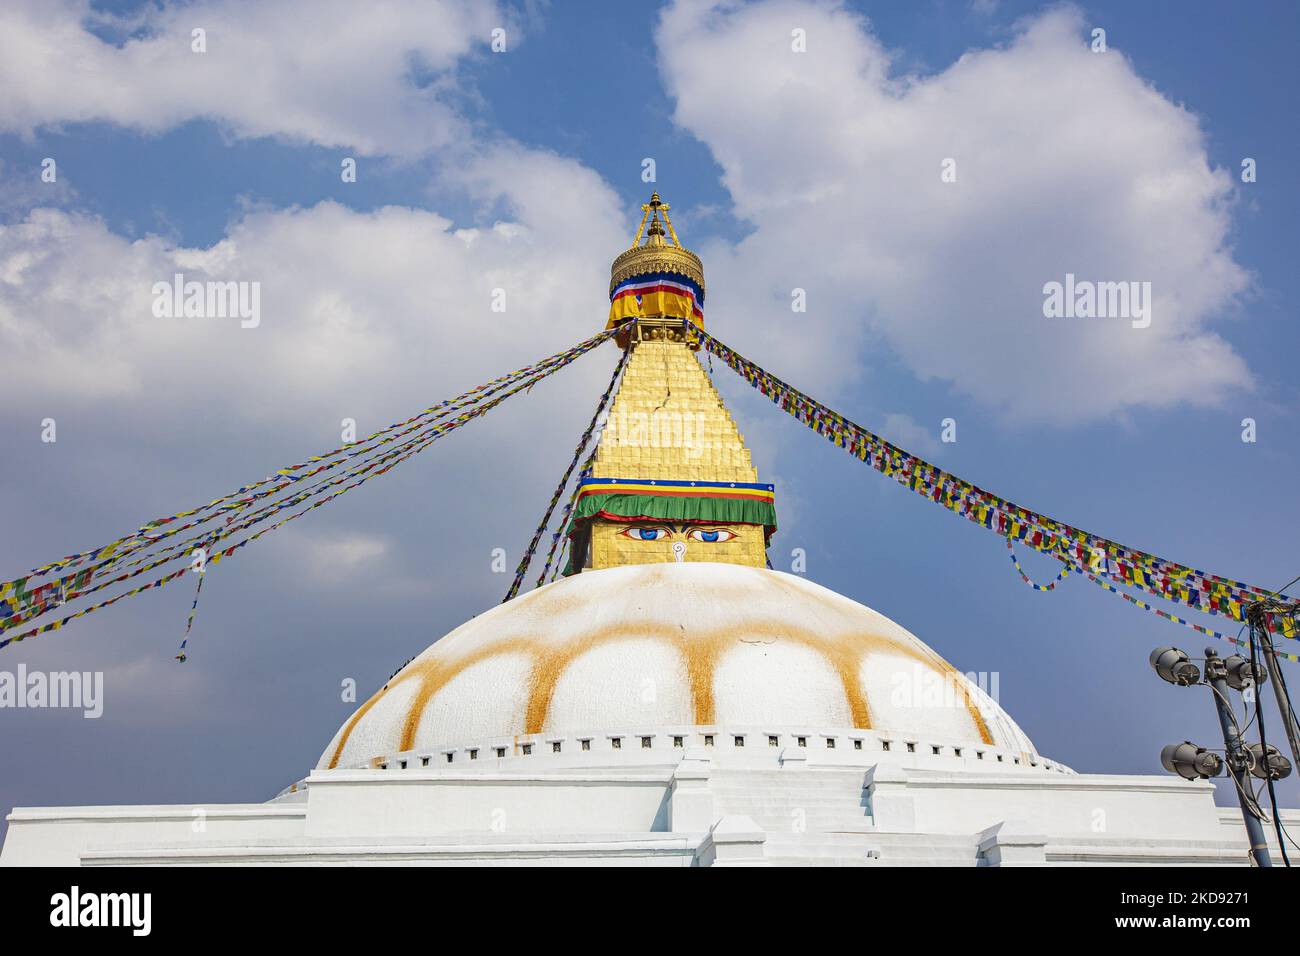 Closeup at the golden top with the Eyes of the stupa, where the praying flags begin. Boudhanath or Bouddha Stupa in Kathmandu a UNESCO World Heritage Site and a legendary place for the Newar and Tibetan Buddhist mythology with the golden part having the Eyes of Boudhanath and the praying flags. One of the most popular tourist attraction in Kathmandu, the mandala makes it one of the largest spherical stupas in Nepal and the world. The Stupa was damaged in the 2015 April earthquake. The Stupa is located on the ancient trade route from Tibet, and the Tibetan Refugees after the 1950s decided to li Stock Photo